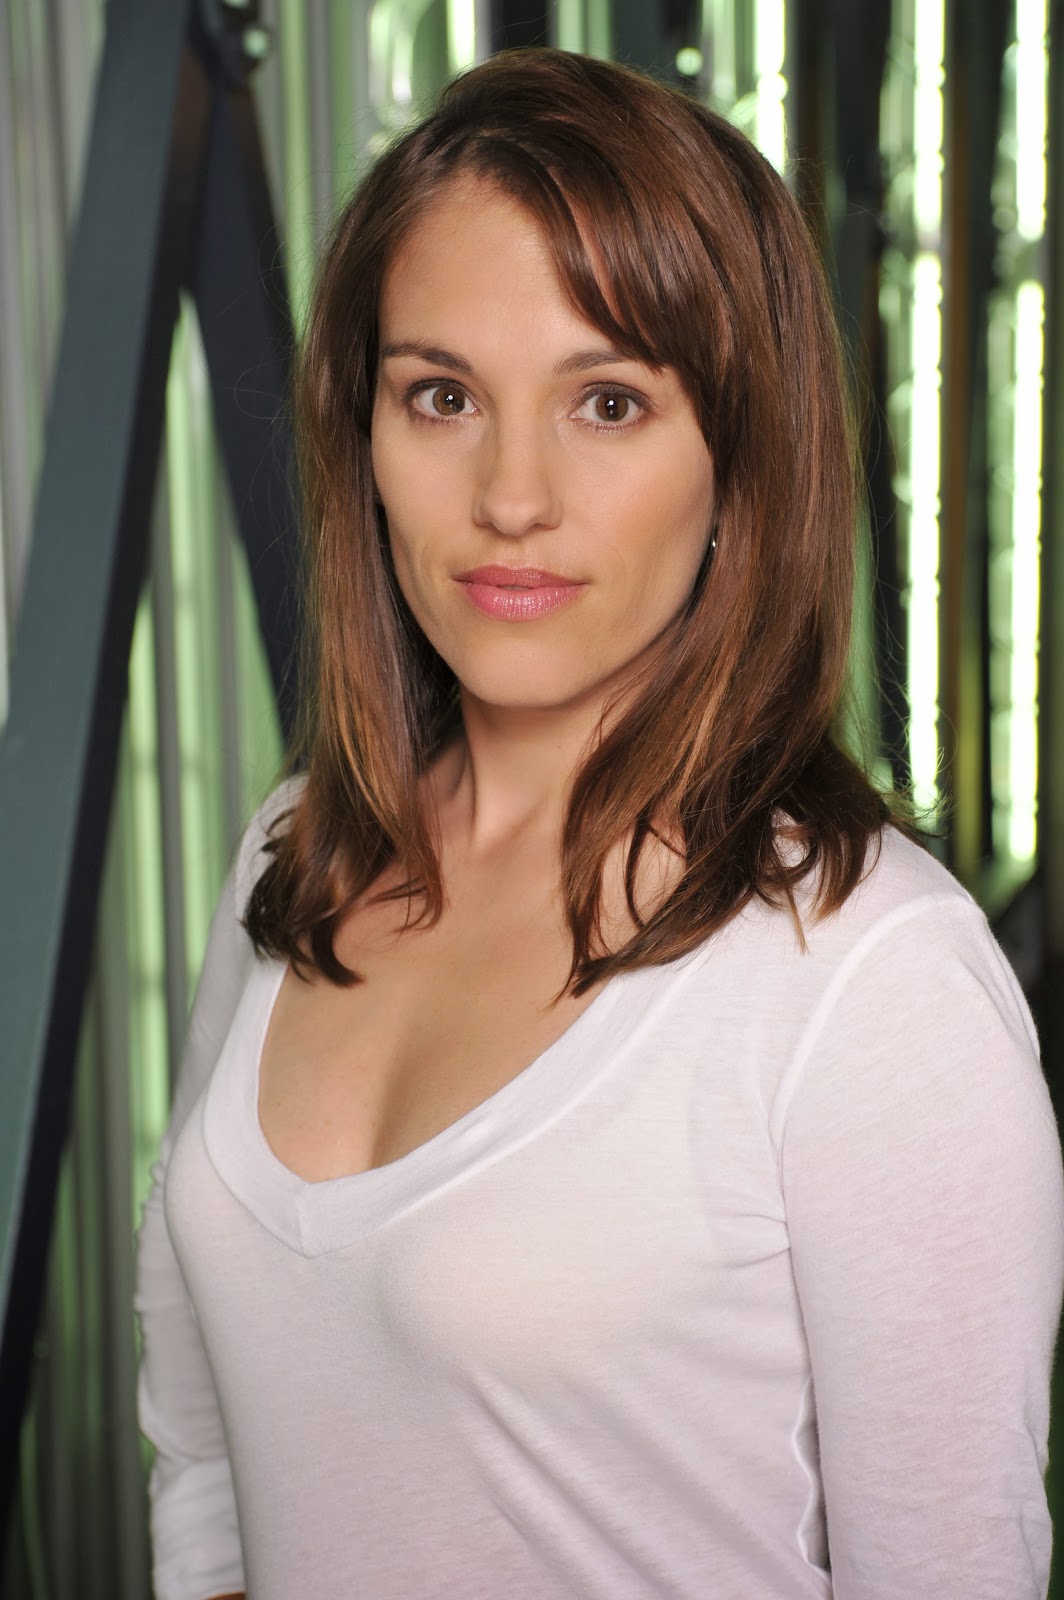 Hot Pictures Of Amy Jo Johnson The First Pink Ranger In Power Rangers Series Page 2 Of 3 